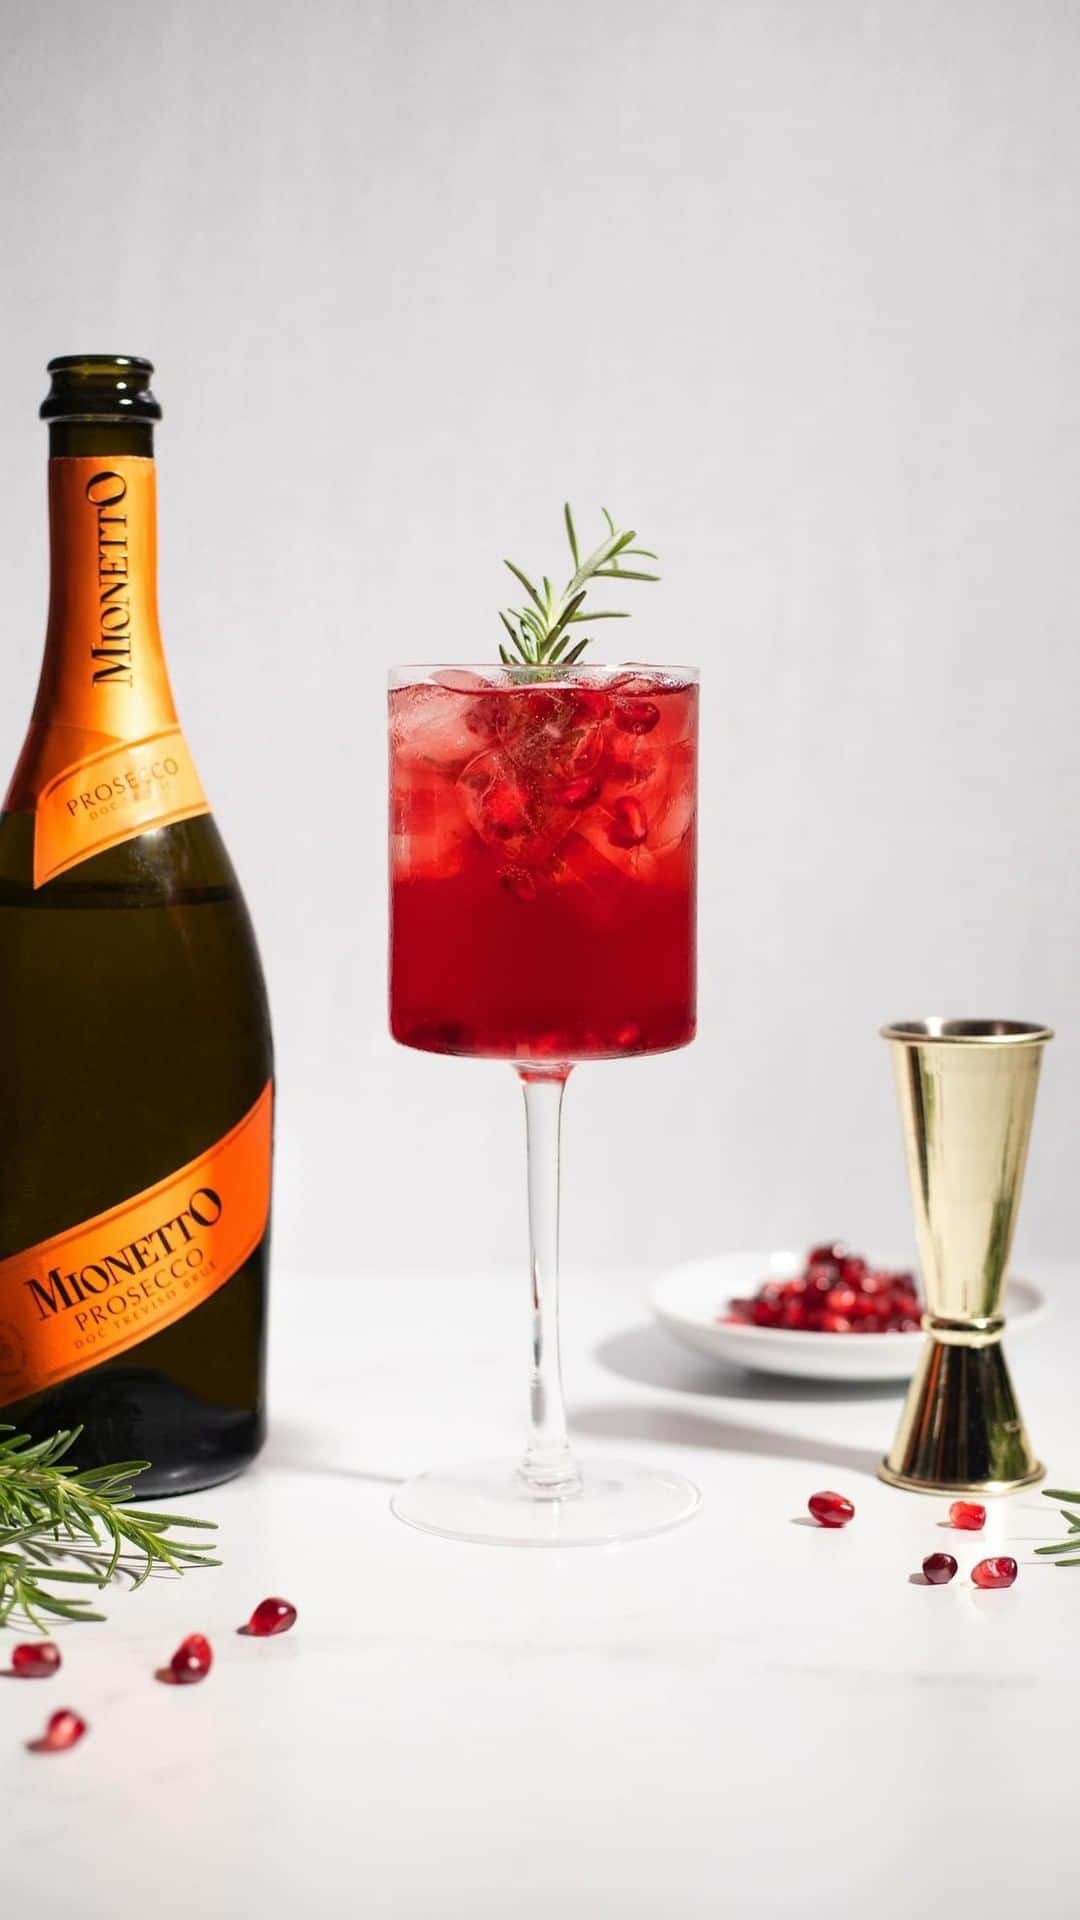 Mionetto USAのインスタグラム：「Allora! Join Mionetto Prosecco as we continue to take you to some of the most bellisime cities in Italy with our Mionetto 3-2-1 Spritz Collection. 🎁🍾  In the spirit of the holidays and keeping it fashion forward, we’ve crafted the Mio Milano Spritz, immersing you in Milan’s vibrant energy, elegance and style! 🧡! With 3 oz. Mionetto Prosecco, 2 oz. Pomegranate Juice and 1 oz. Club Soda, our Mio Milano is the ideal drink to serve during your holiday aperitivo. Cin Cin! 🍾  #MionettoProsecco #TheMilano #HolidaySpritz   🇪🇺CAMPAIGN FINANCED ACCORDING TO EU REGULATION NO. 3018/2013.  Mionetto Prosecco material is intended for individuals of legal drinking age. Share Mionetto content responsibly with those who are 21+ in your respective country.  Enjoy Mionetto Prosecco Responsibly.」